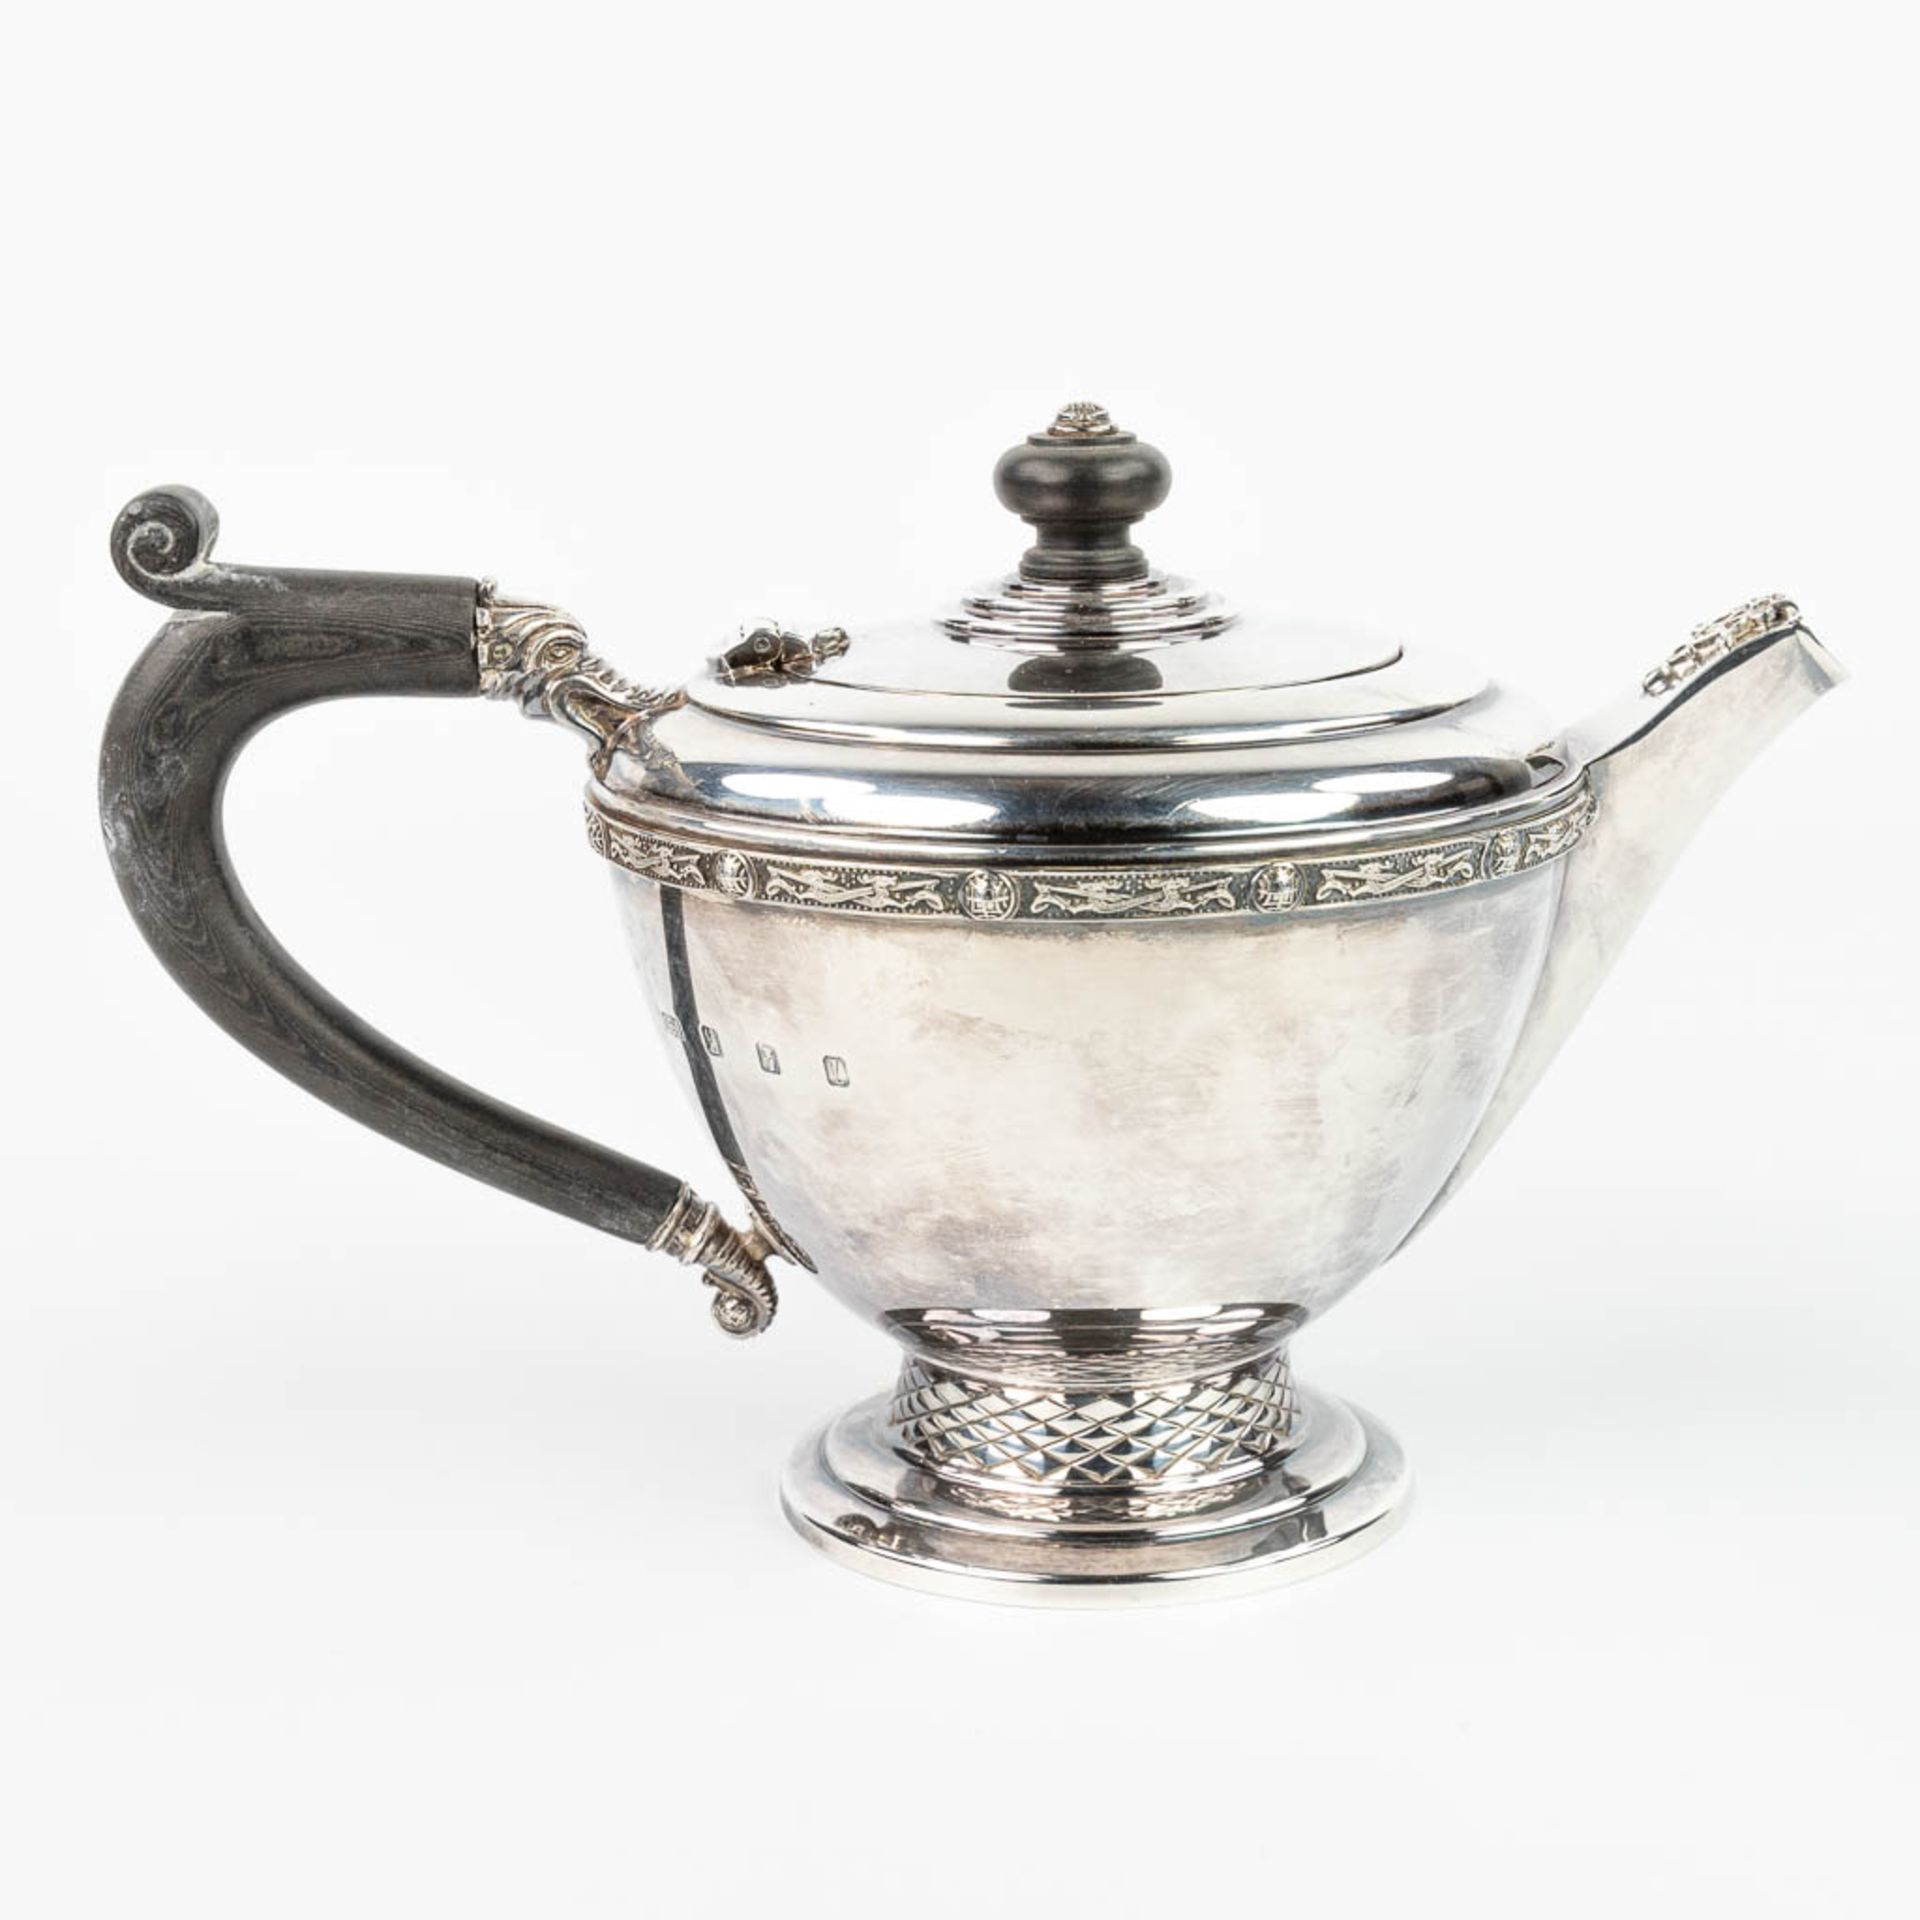 A fine silver teapot with ebony handles and made in Ireland, 1977. (H:16,5cm) - Image 7 of 18